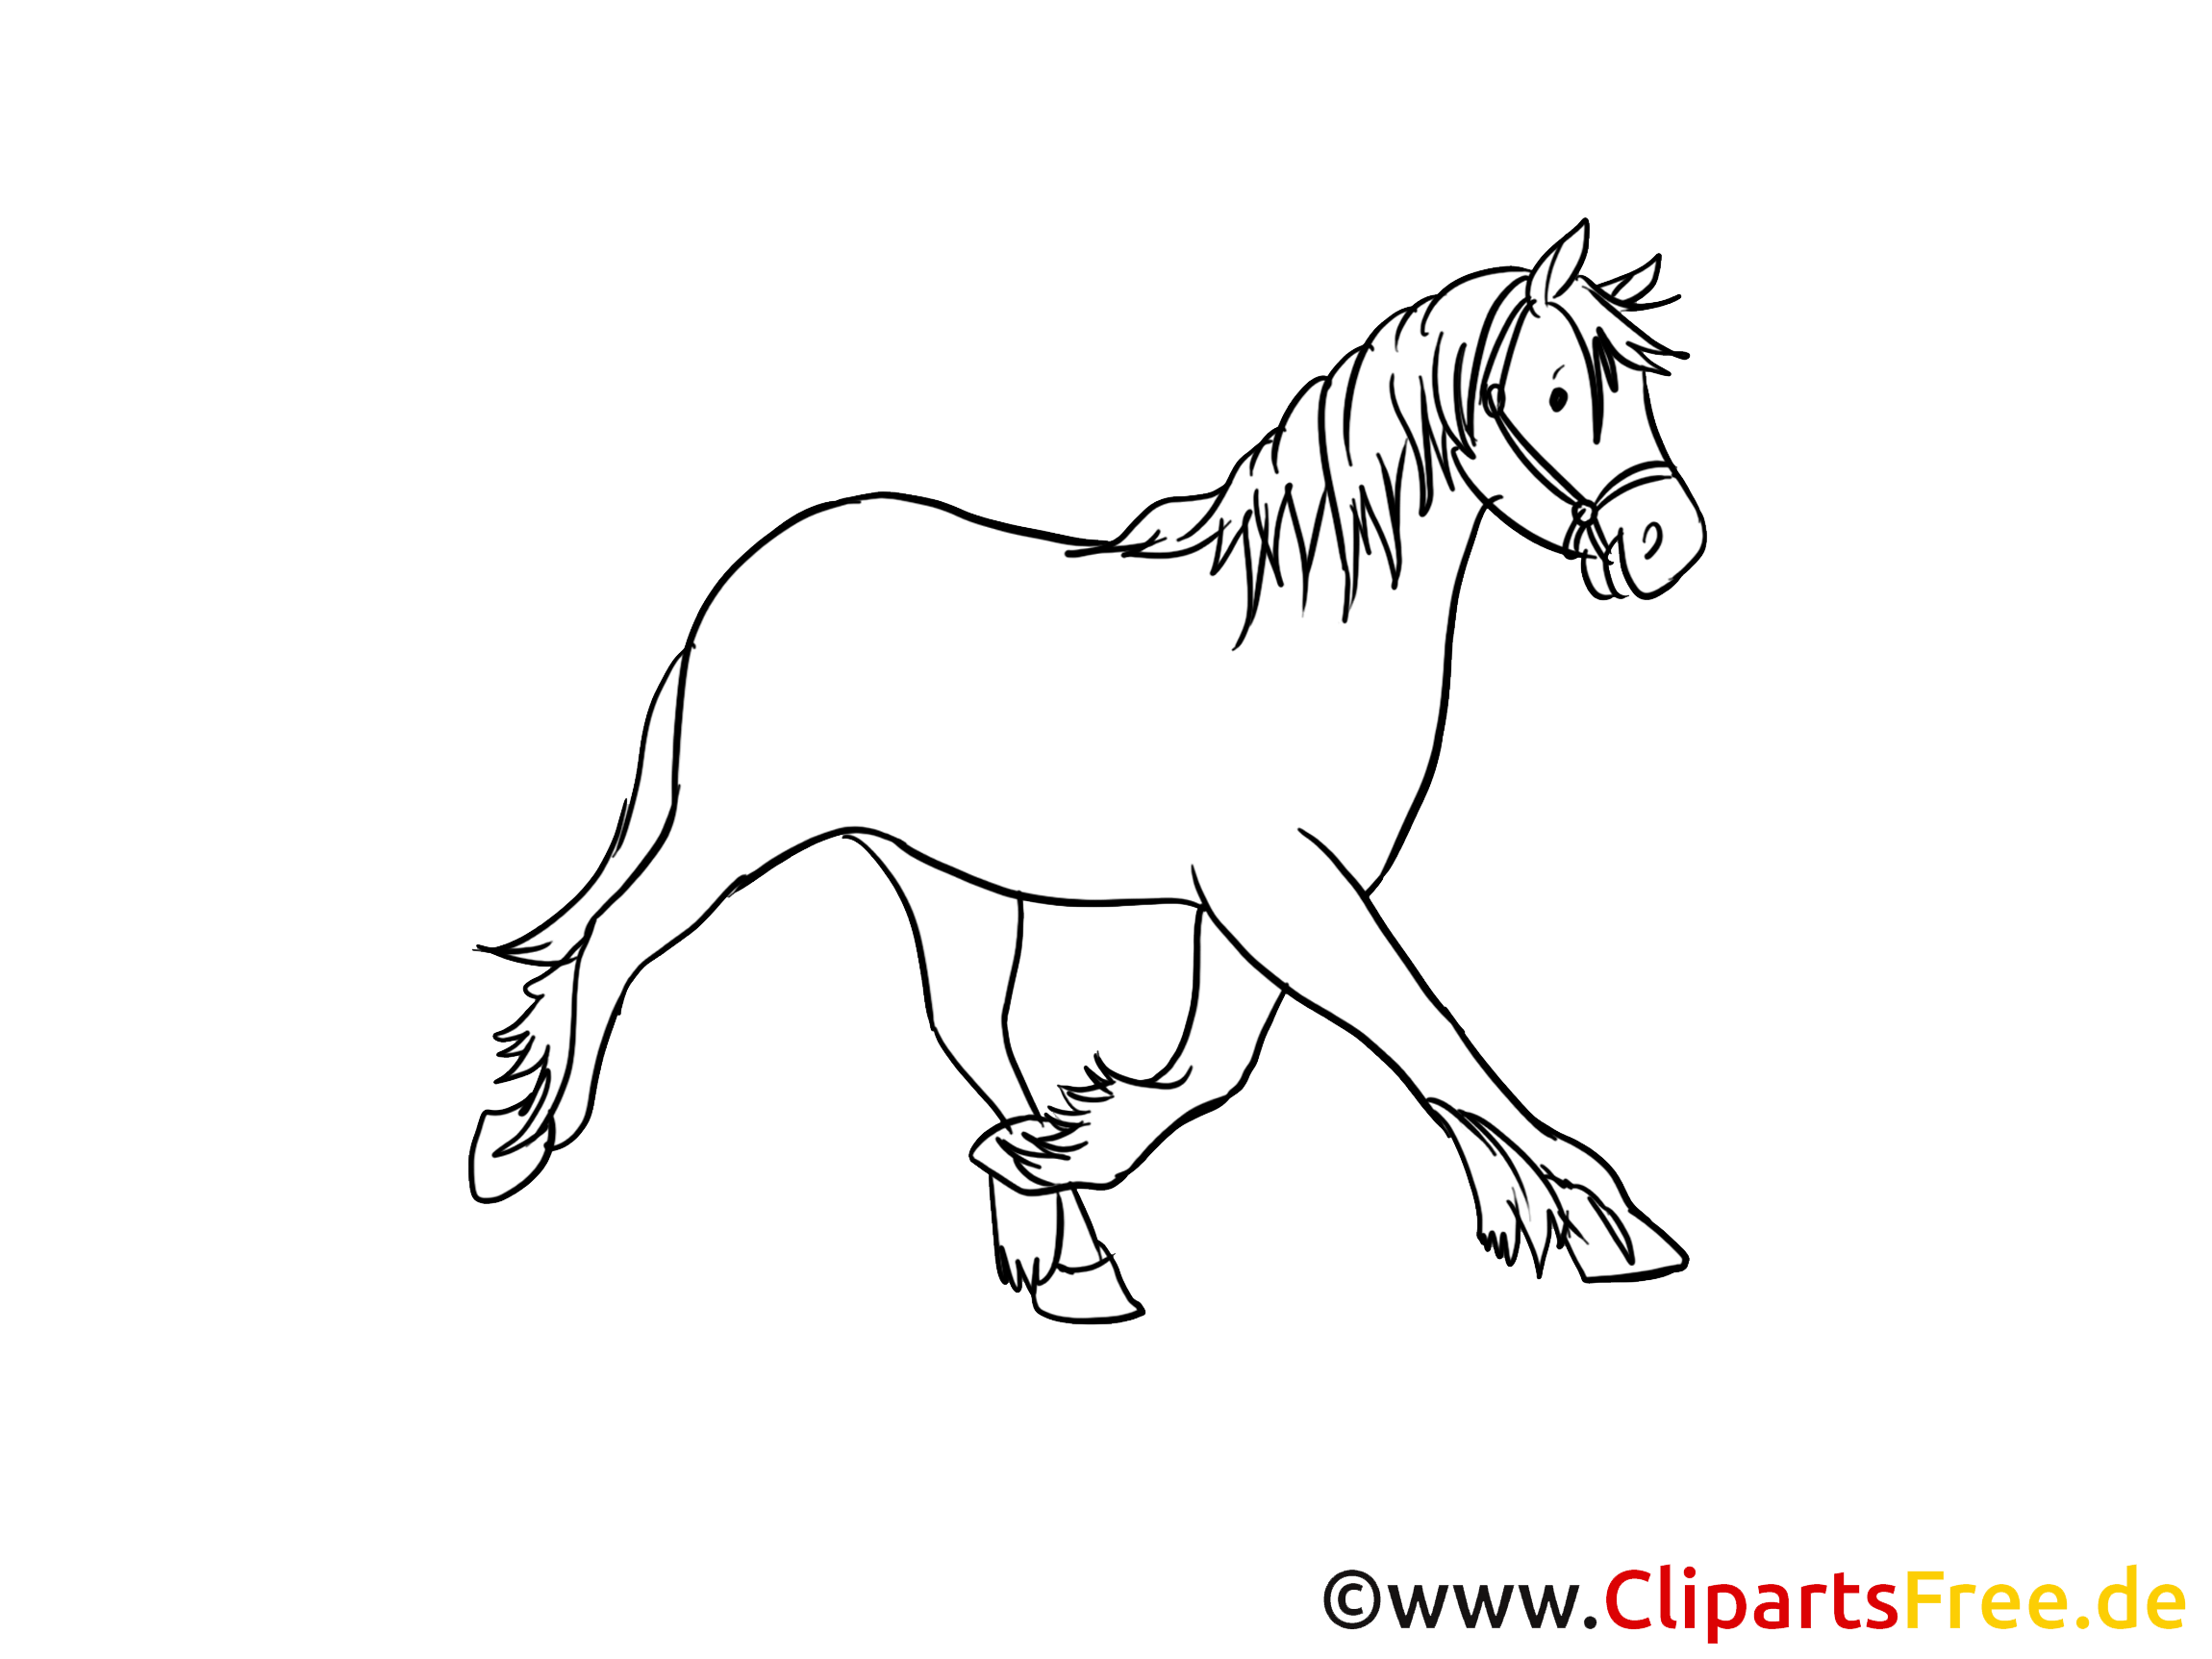 free horse clipart black and white - photo #37